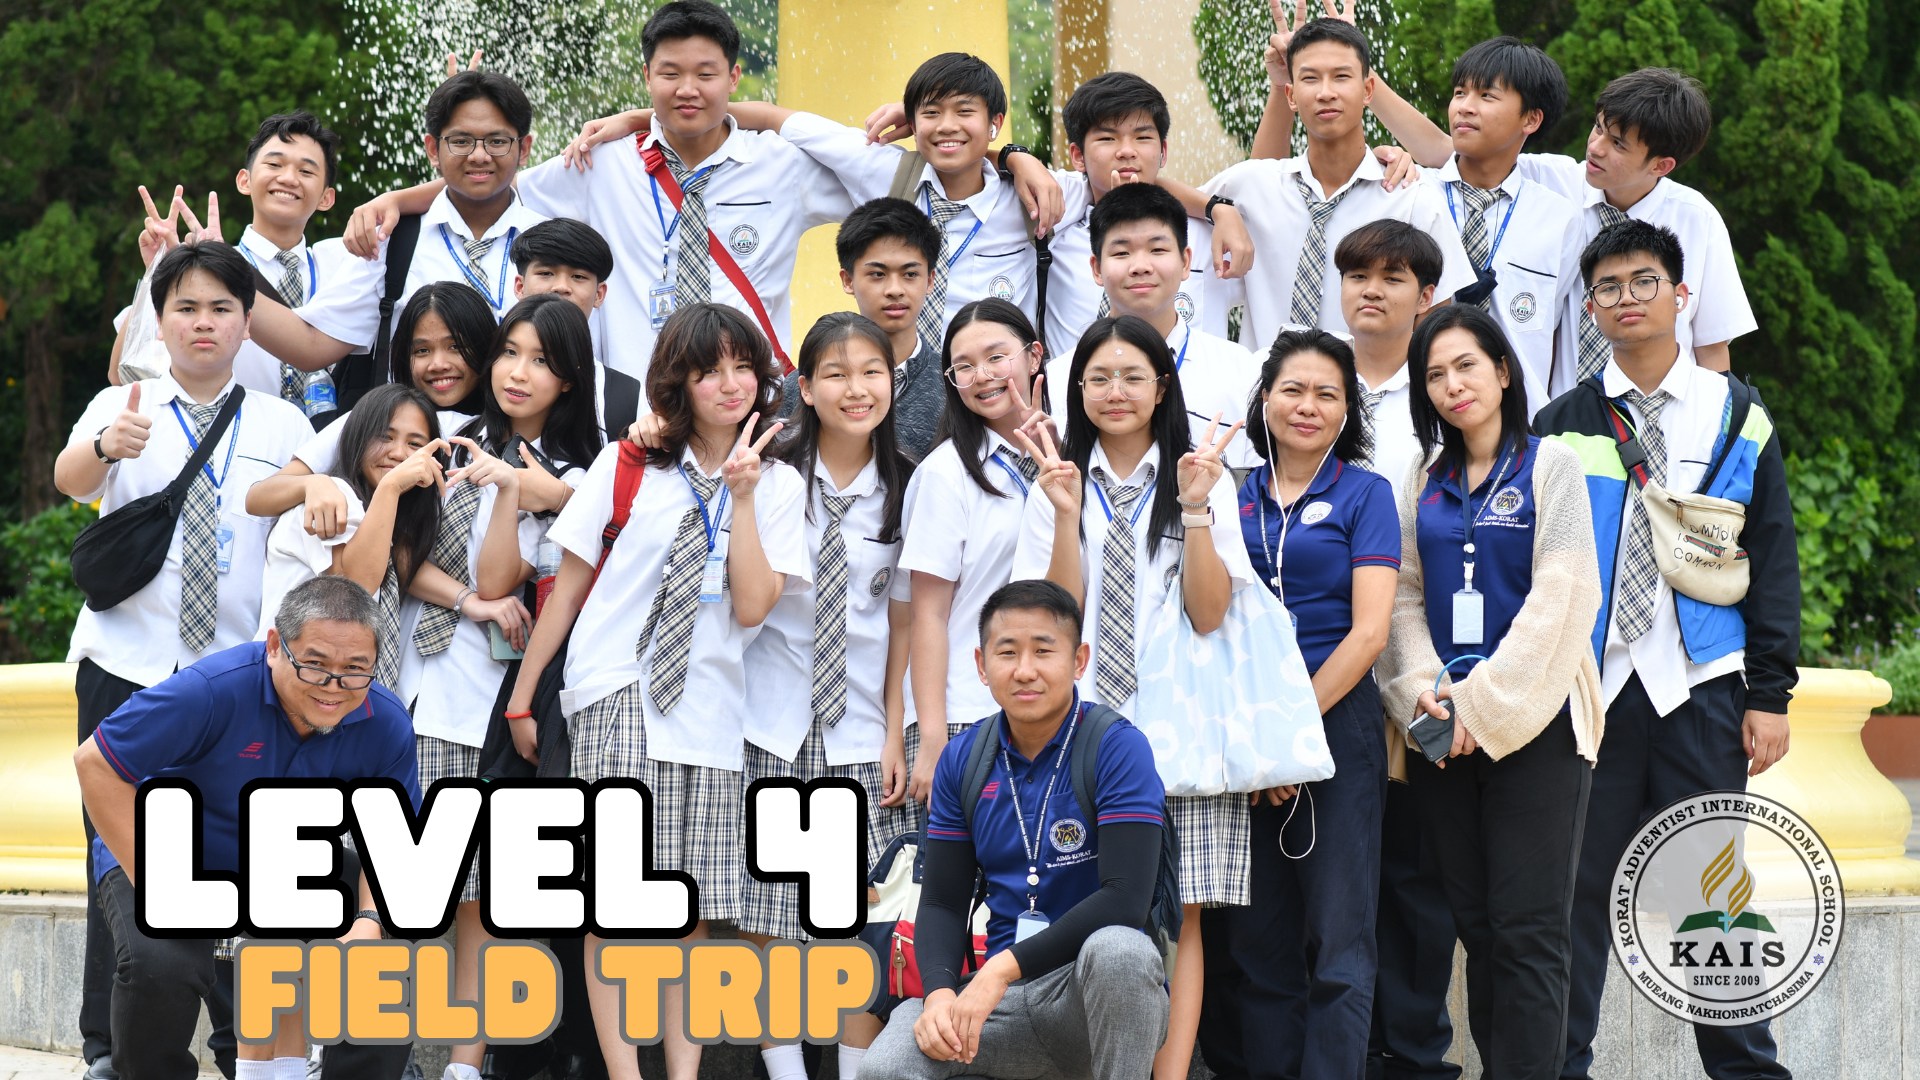 You are currently viewing KAIS Level 4 Field Trip